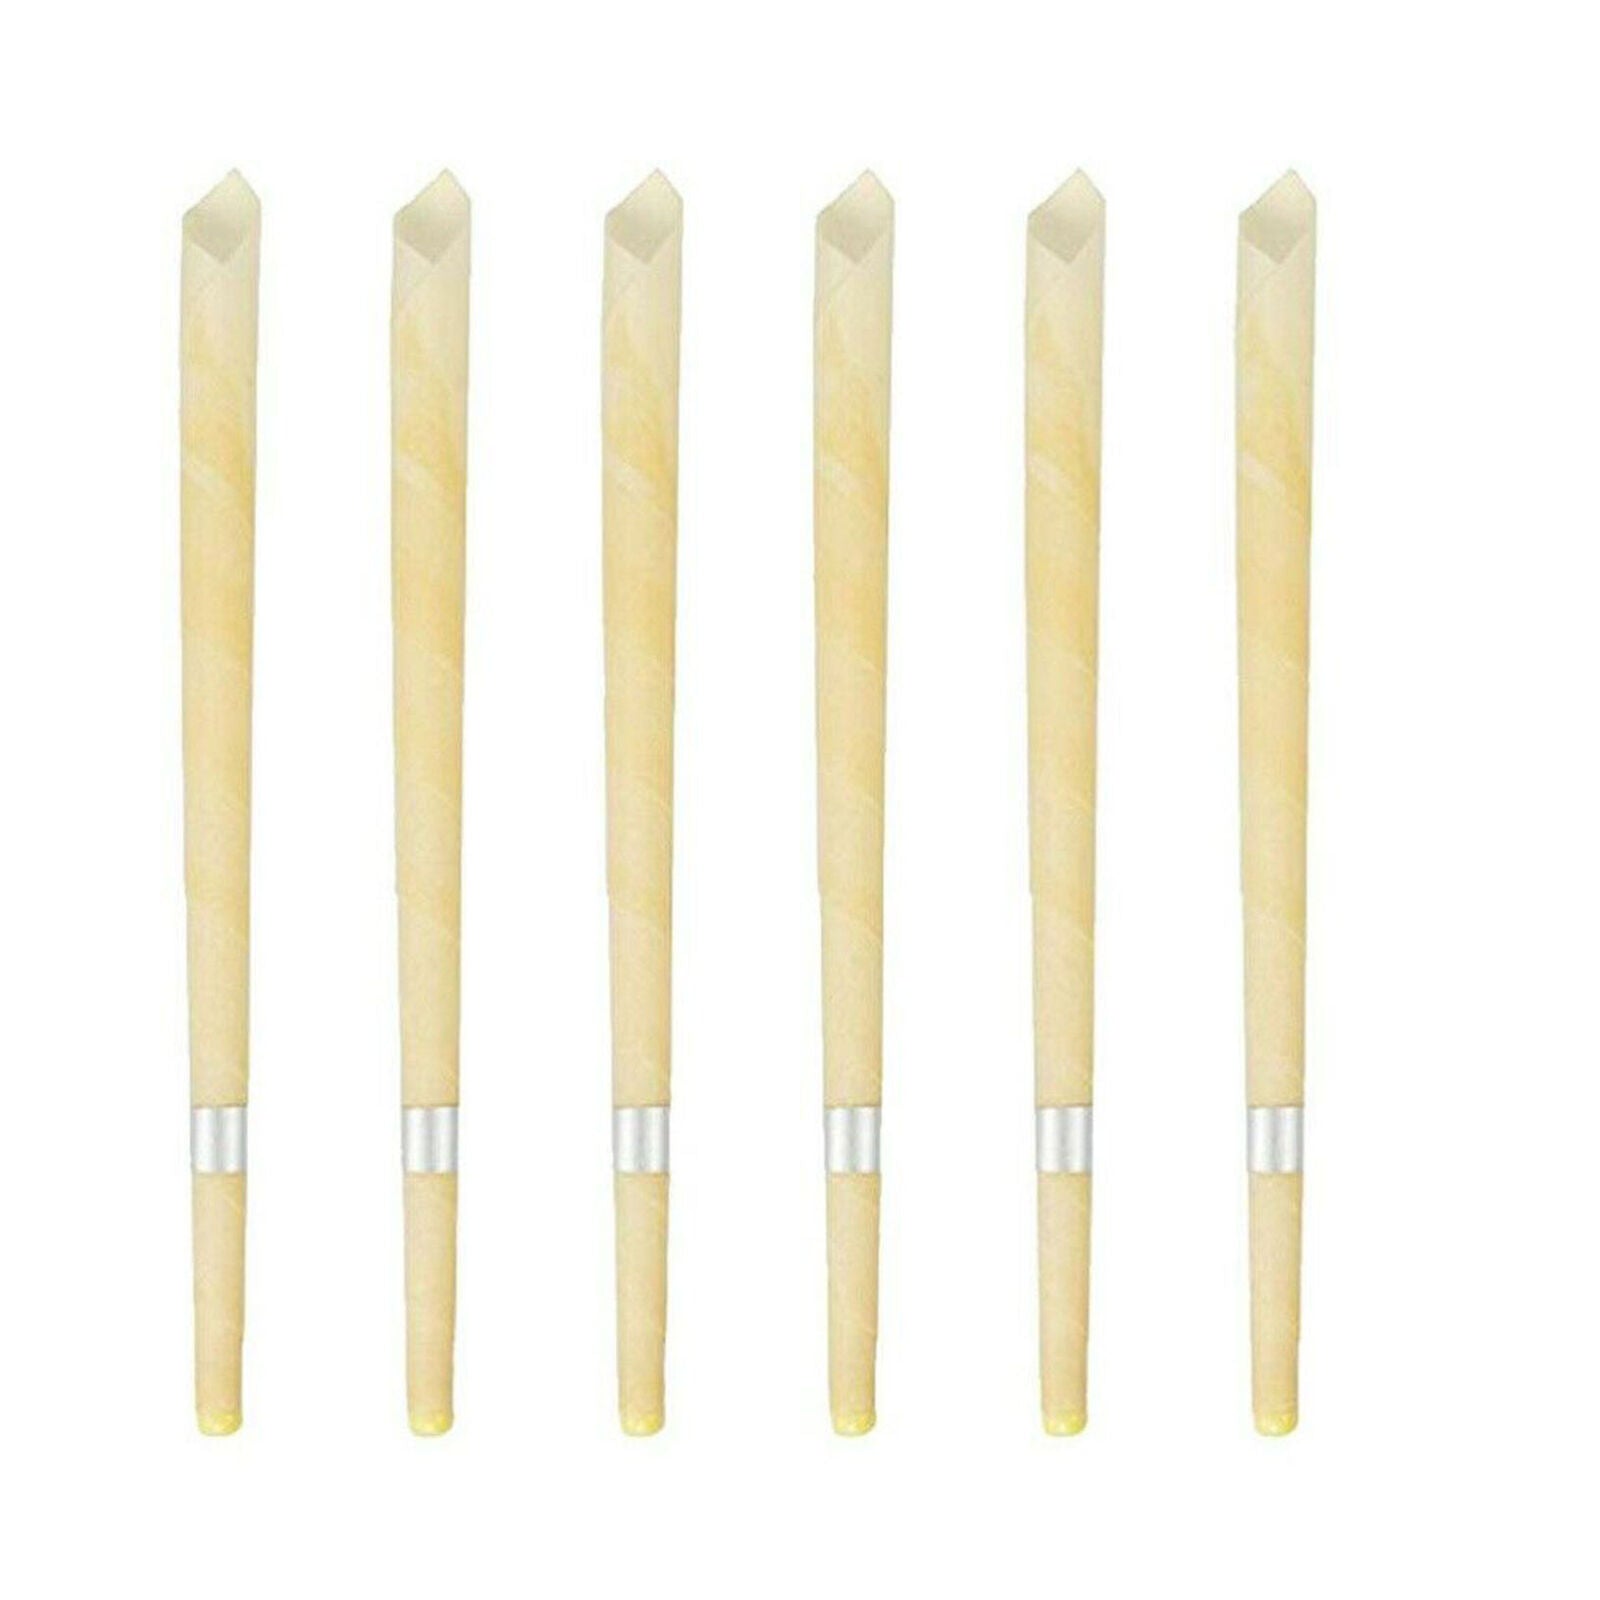 10PCS Organic Beeswax Aromatherapy Ear Candling Natural Eard Wax Candle SPA Care